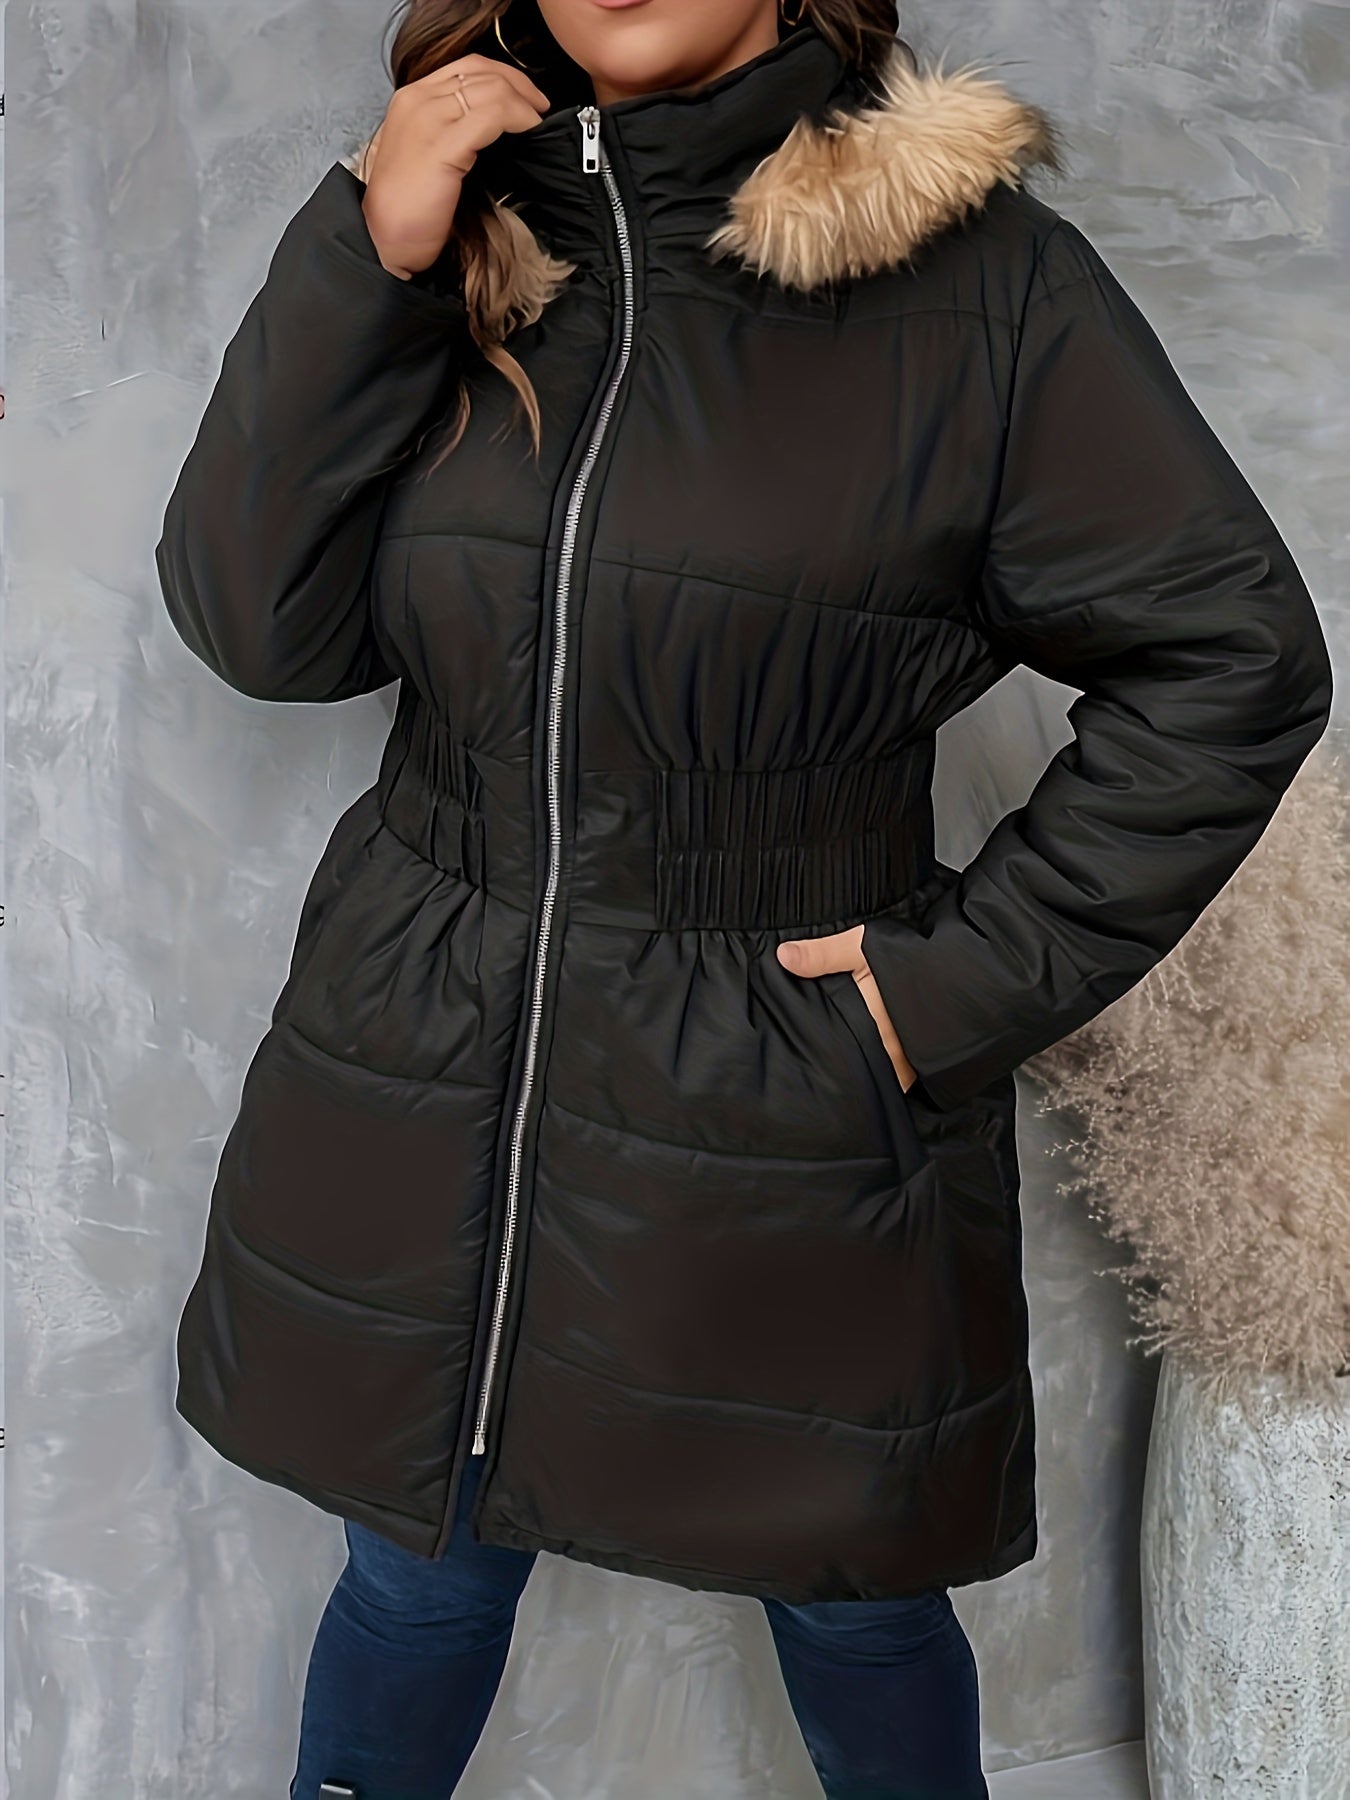 Plus Size Casual Winter Coat, Women's Plus Solid Quilted Fuzzy Trim Hooded Long Sleeve Hooded Nipped Waist Tunic Puffer Coat With Pockets